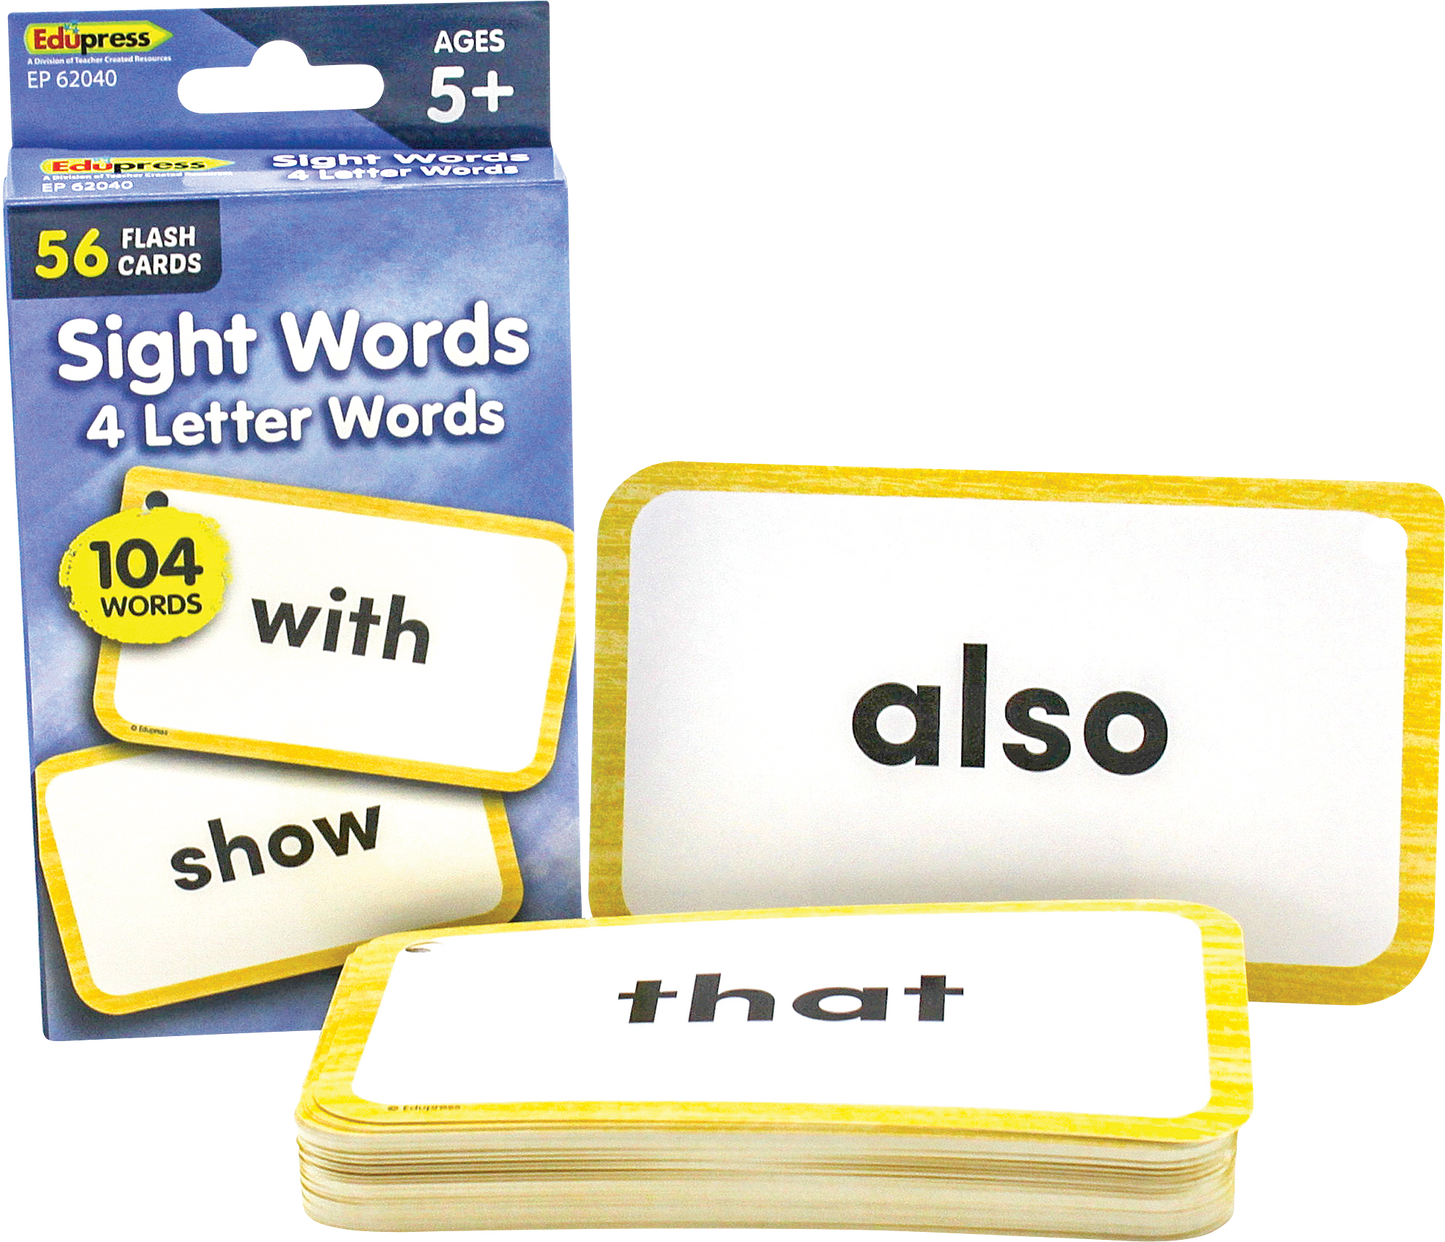 Sight Words Flash Cards - 4 Letter Words